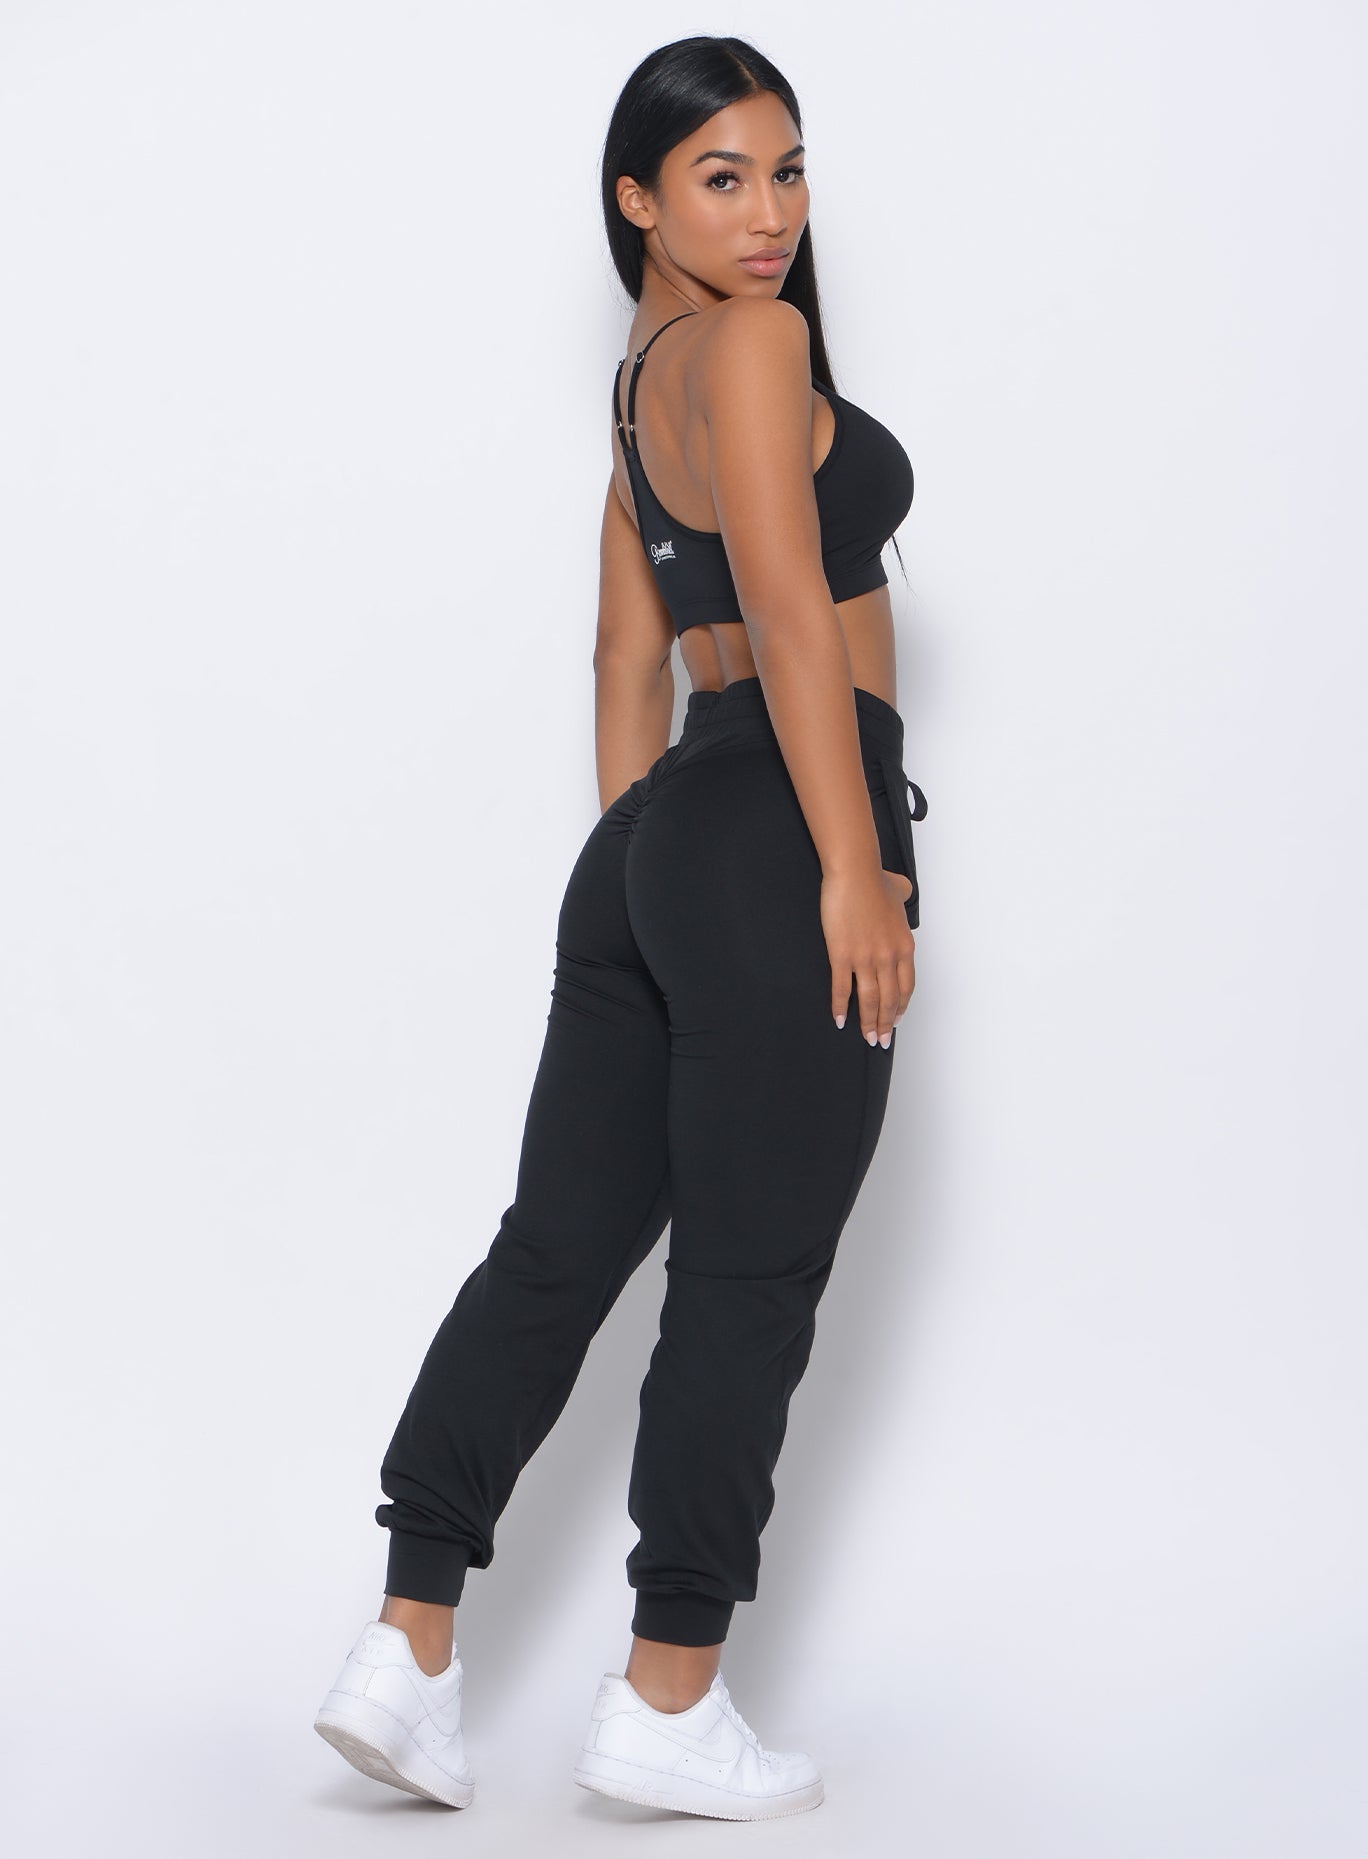 Right side view of the model facing to her right wearing our black Relax Sports Bra and a matching joggers